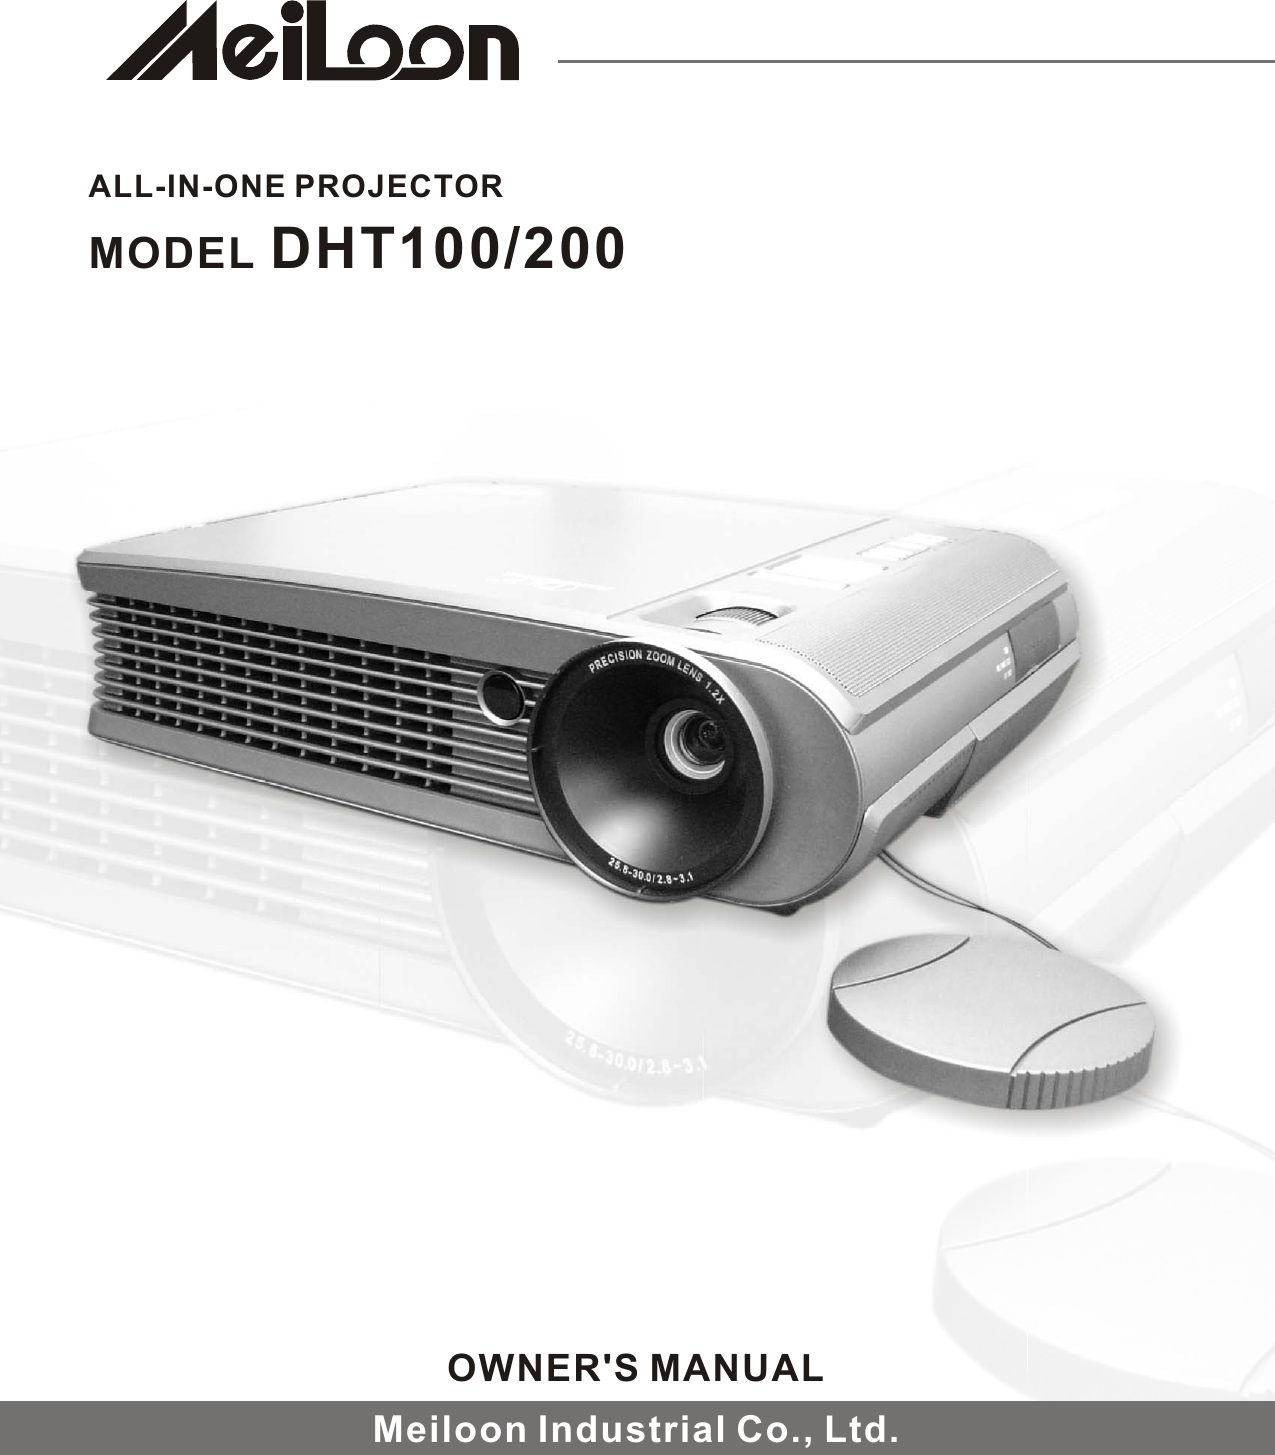 ALL-IN-ONE PROJECTORMODEL DHT100/200OWNER&apos;S MANUALMeiloon Industrial Co., Ltd.